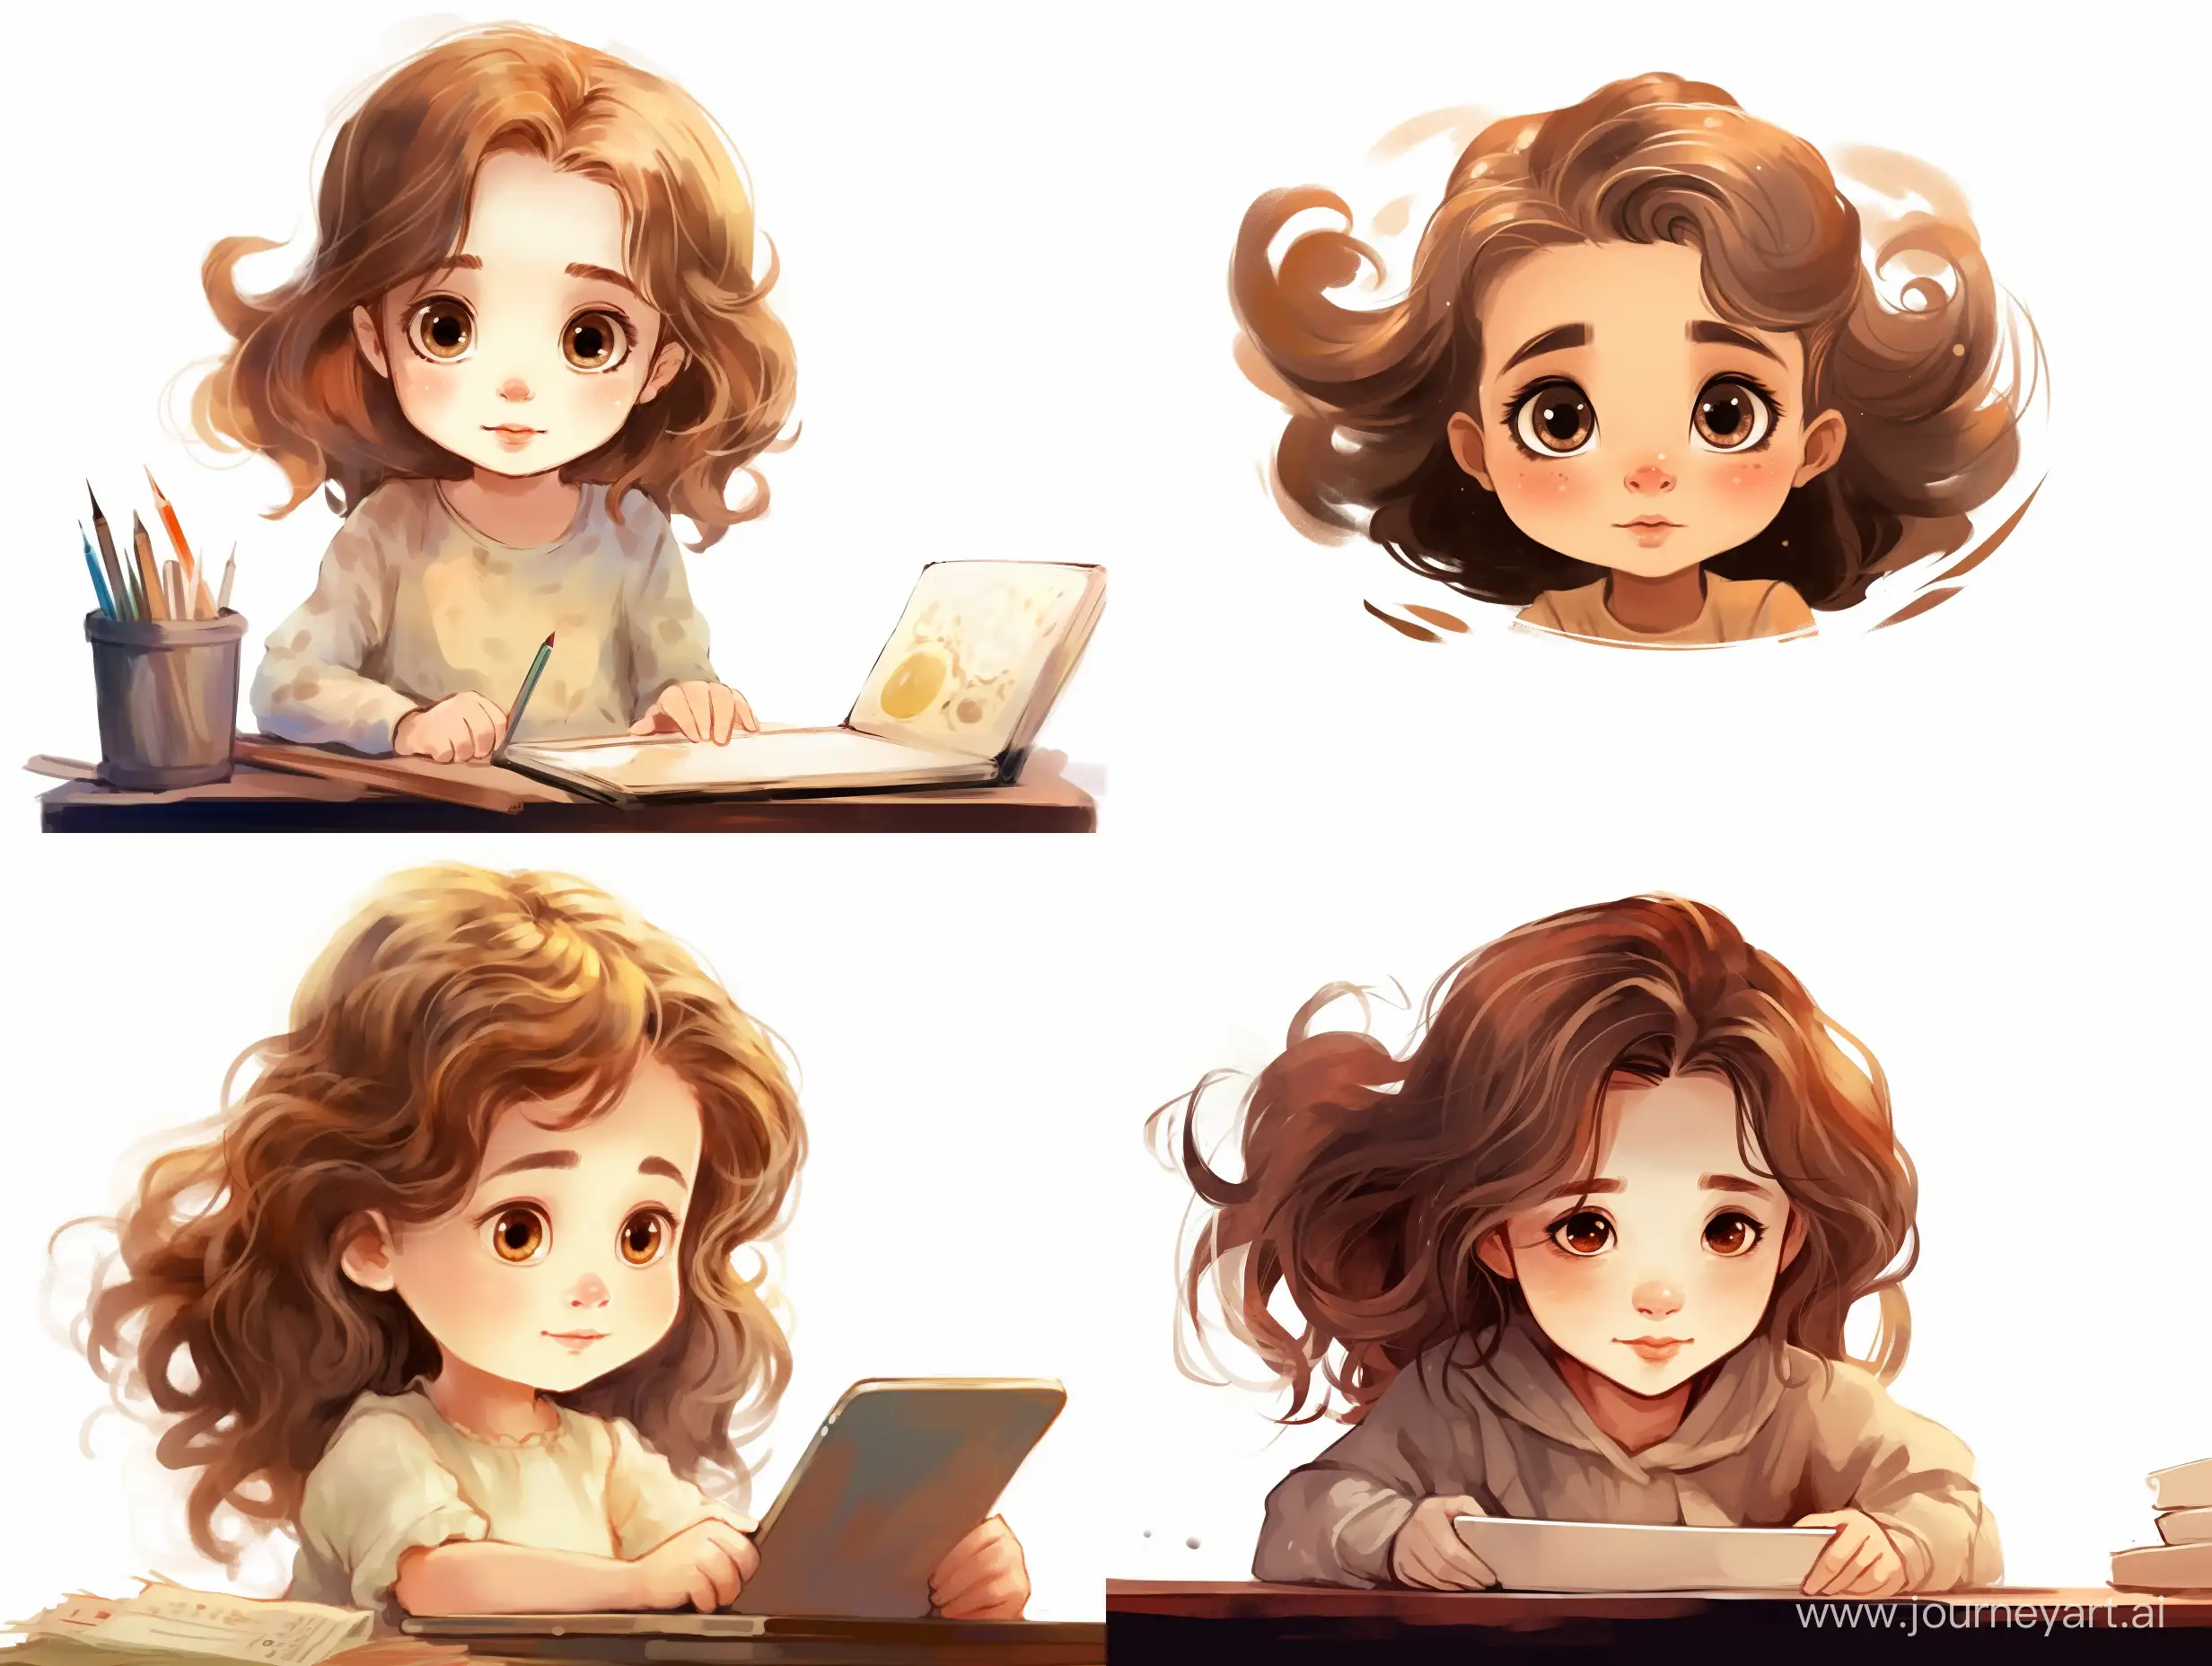 A three-year-old girl, light brown hair above her shoulders, with brown eyes, long eyelashes, small mouth, thin lips, staring intently at a tablet, stylized caricature, decorative, flat illustration, on a white background, watercolor, ink, Victor Ngai style, bright colors